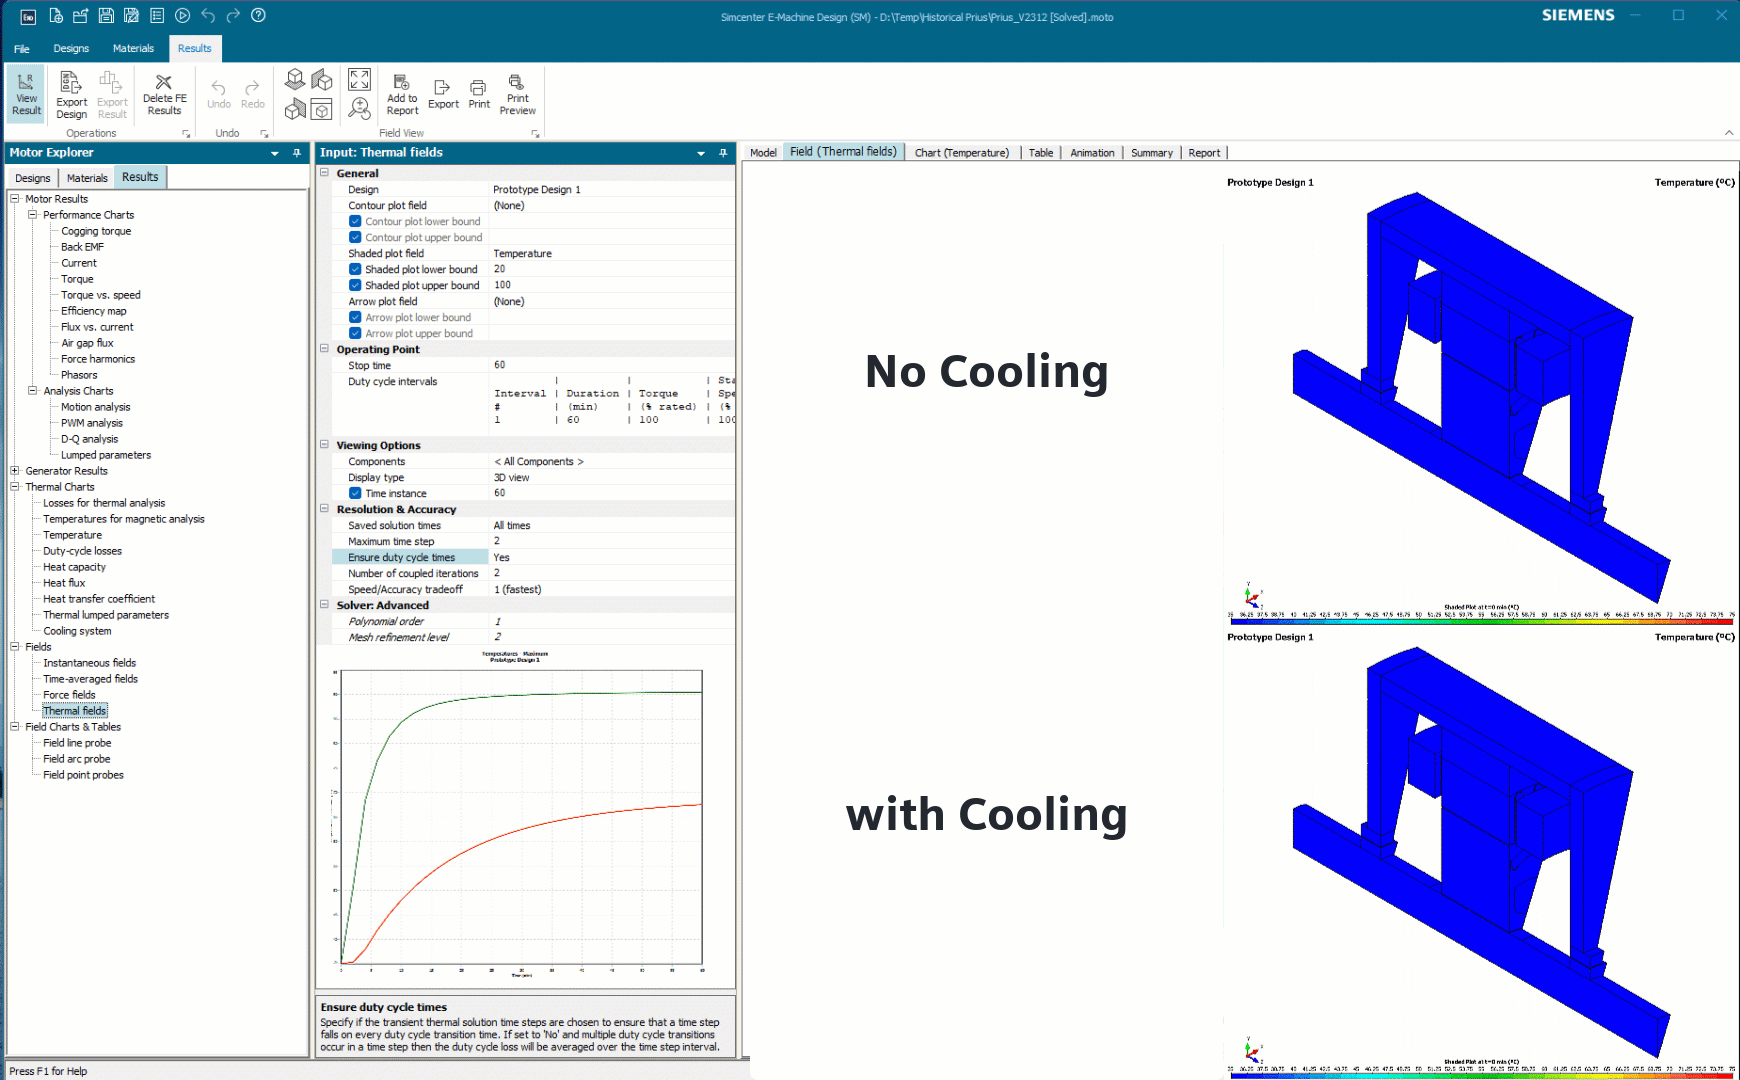 A gif showing the change in temperature while a motor is running for a machine that has no cooling (top) and and machine that has cooling included in its design (bottom)